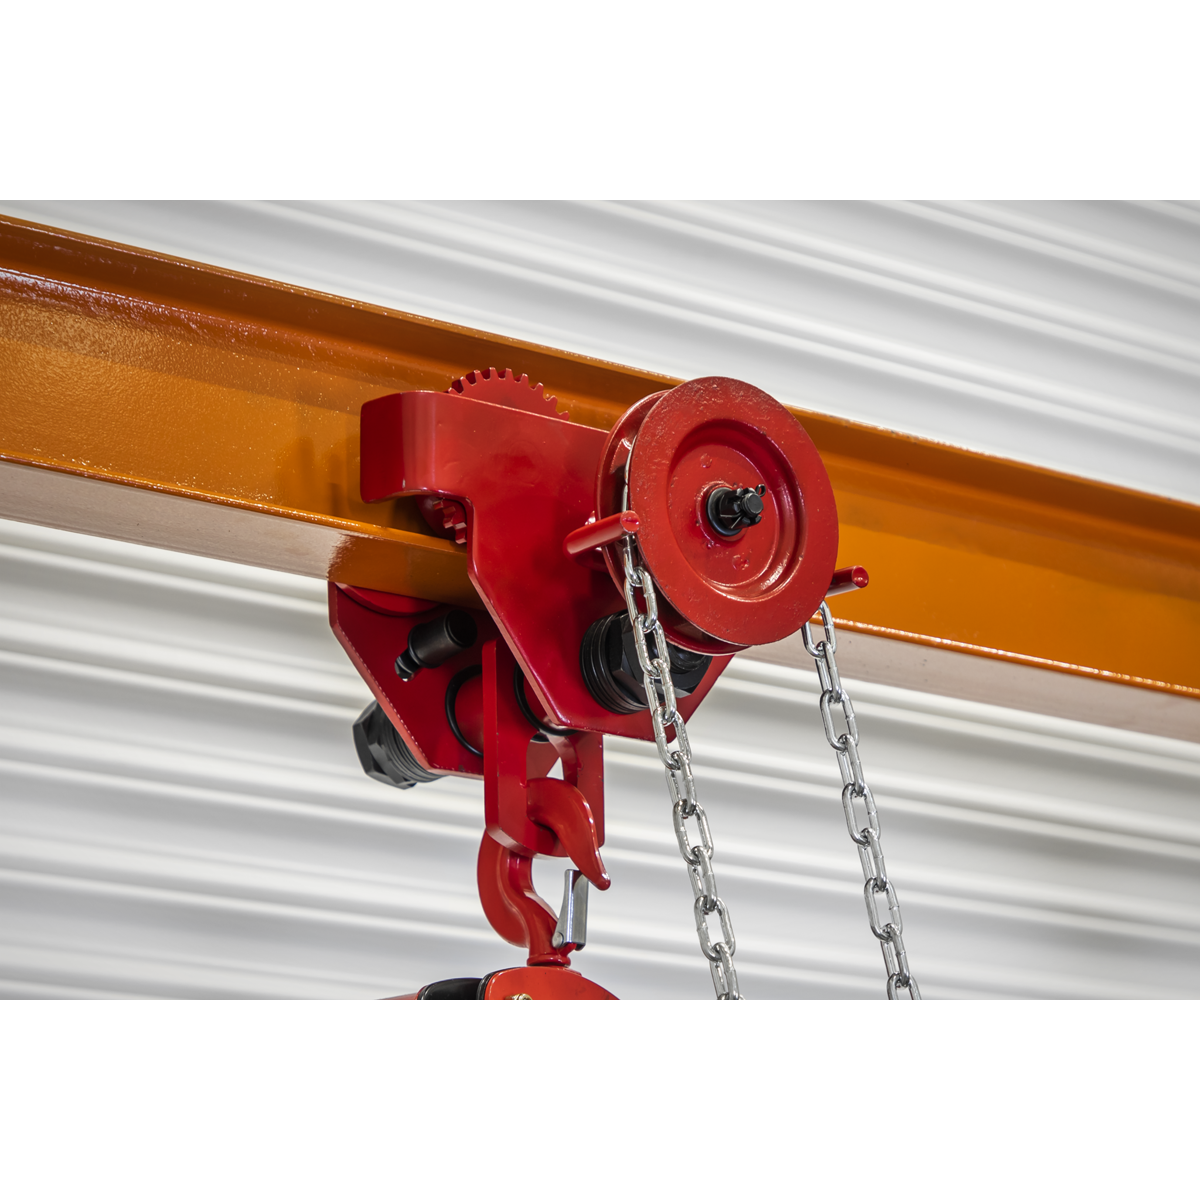 Sealey workshop crane with moveable hoist